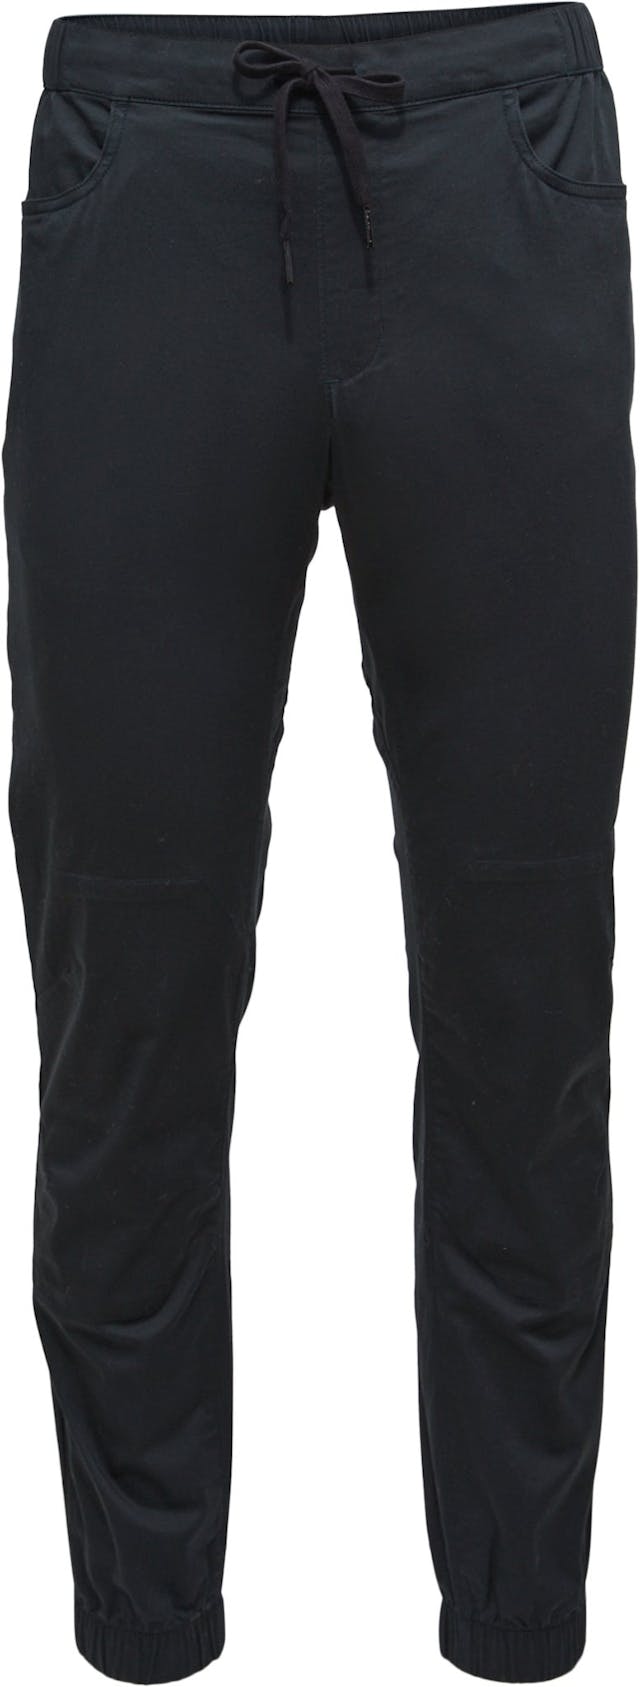 Product image for Notion Pants - Men's